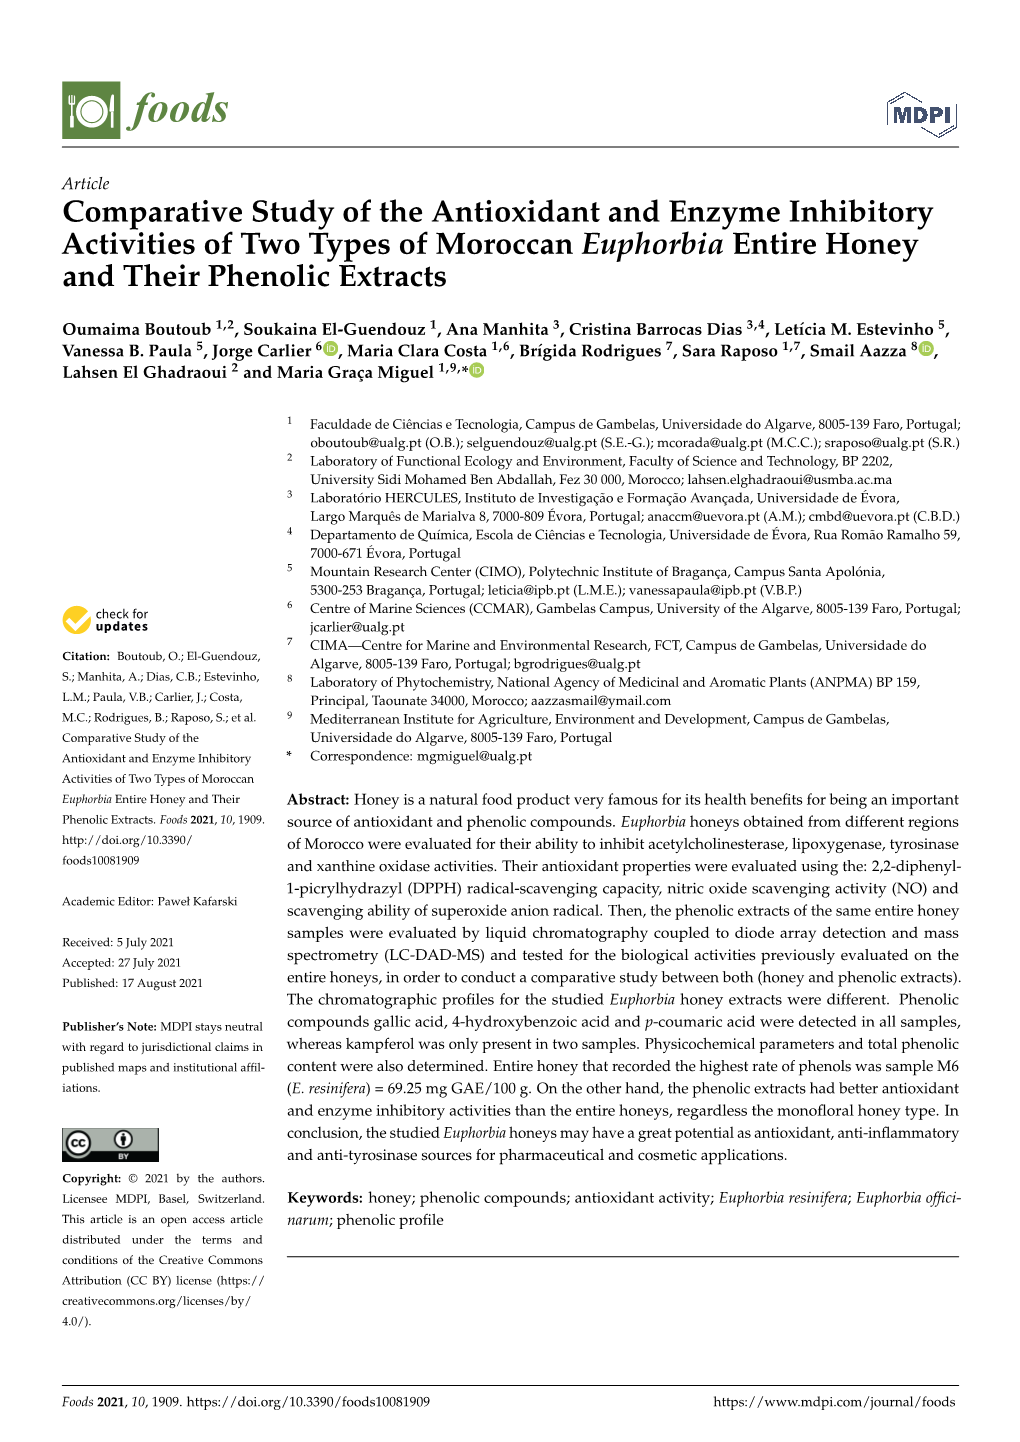 Comparative Study of the Antioxidant and Enzyme Inhibitory Activities of Two Types of Moroccan Euphorbia Entire Honey and Their Phenolic Extracts